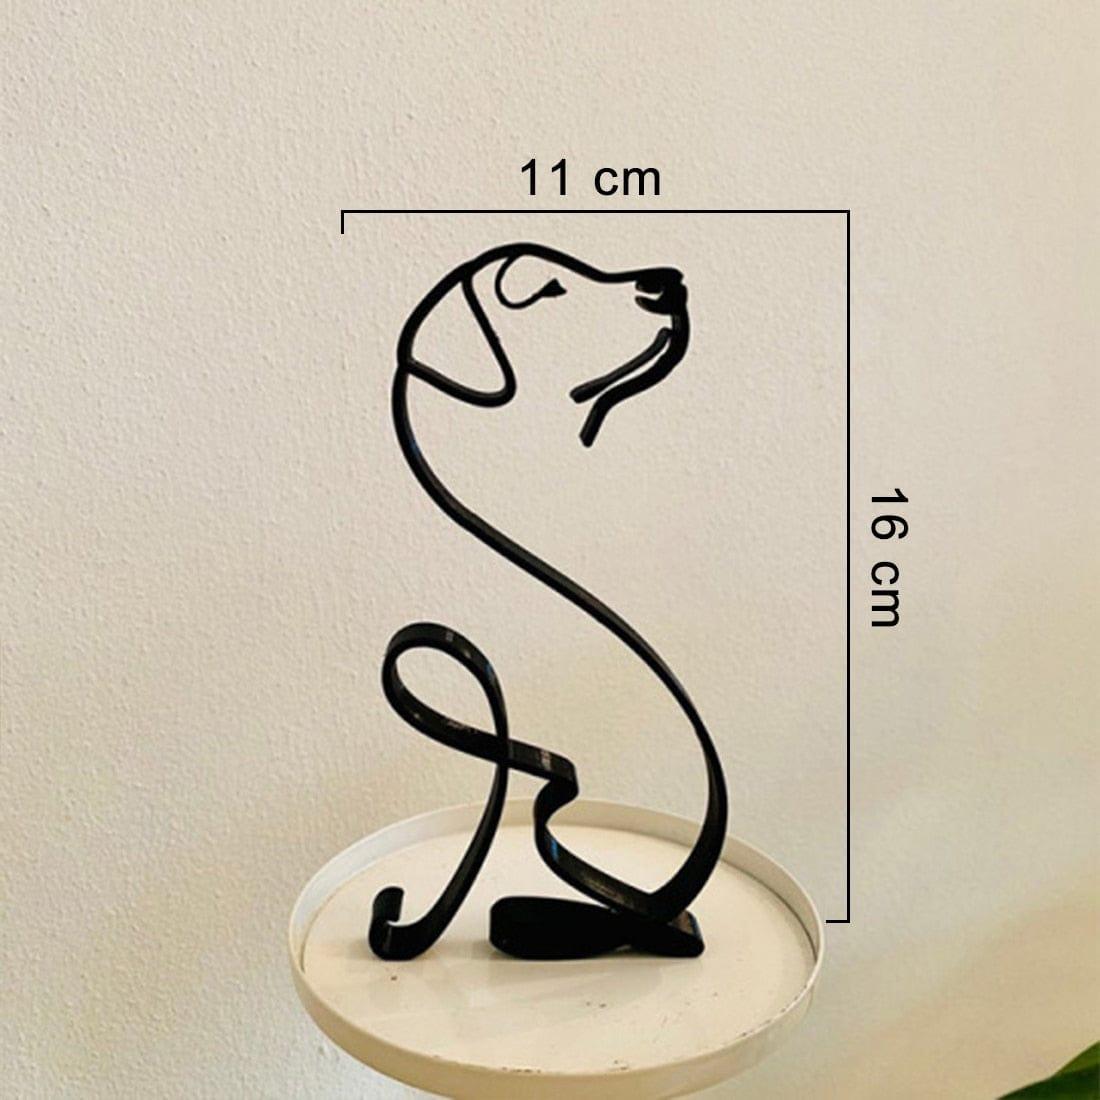 Shop 0 G Dog Art Sculpture Simple Metal Dog Abstract Art Sculpture for Home Party Office Desktop Decoration Cute Pet Dog Cats Gifts Mademoiselle Home Decor